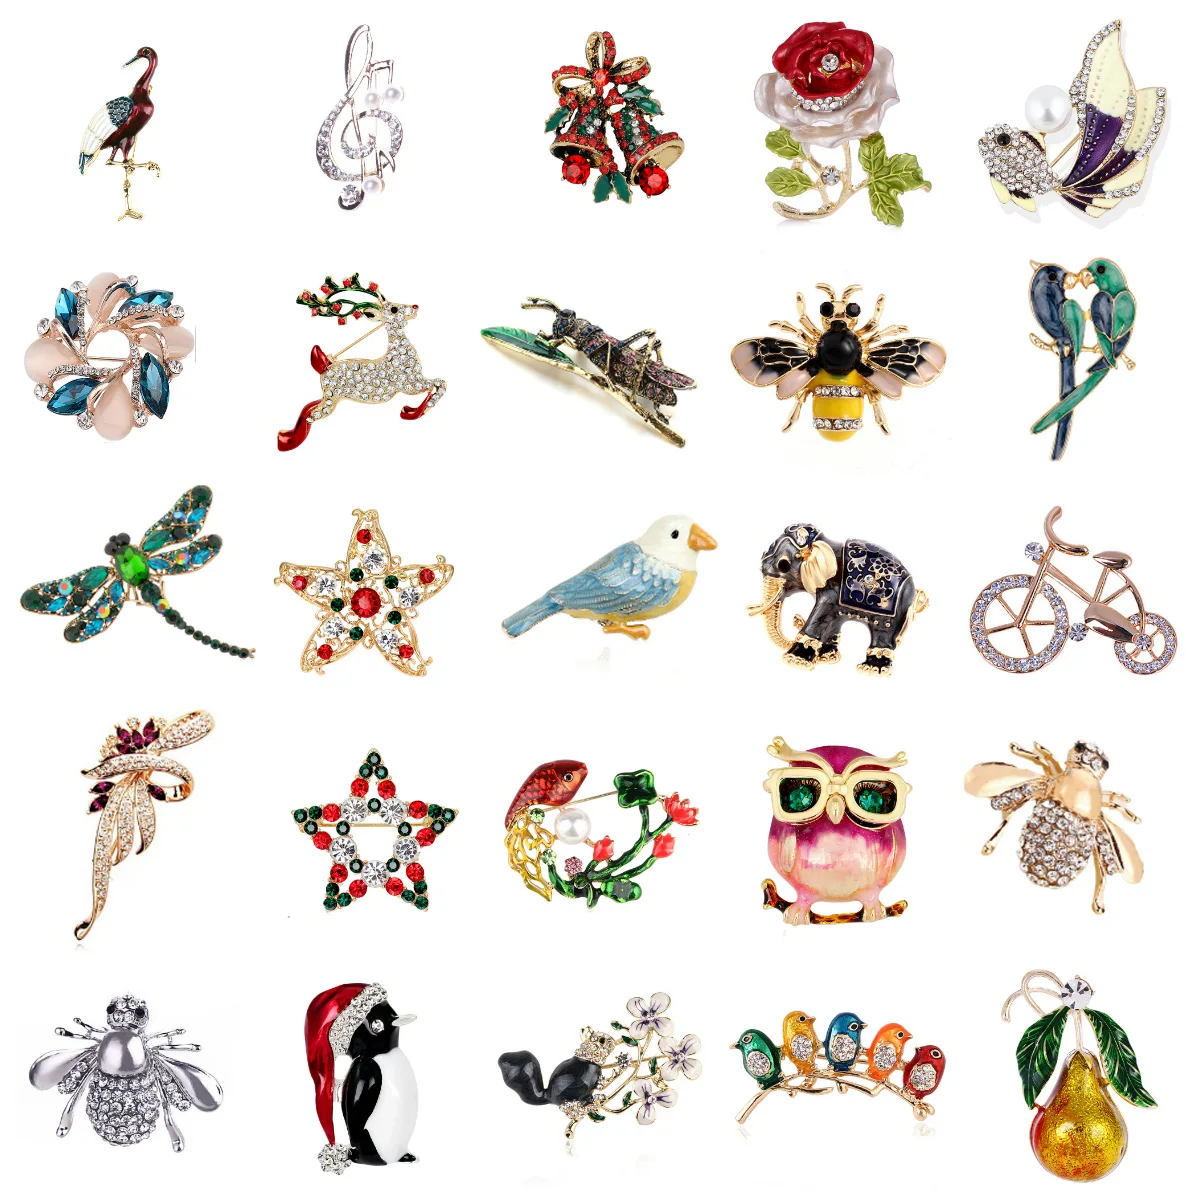 

Bicycle Squirrel Owl Rose Flower Fish Elephant Bird Brooch Collar Pins Corsage Animal Badges Jewelry Women Kids Brooches New